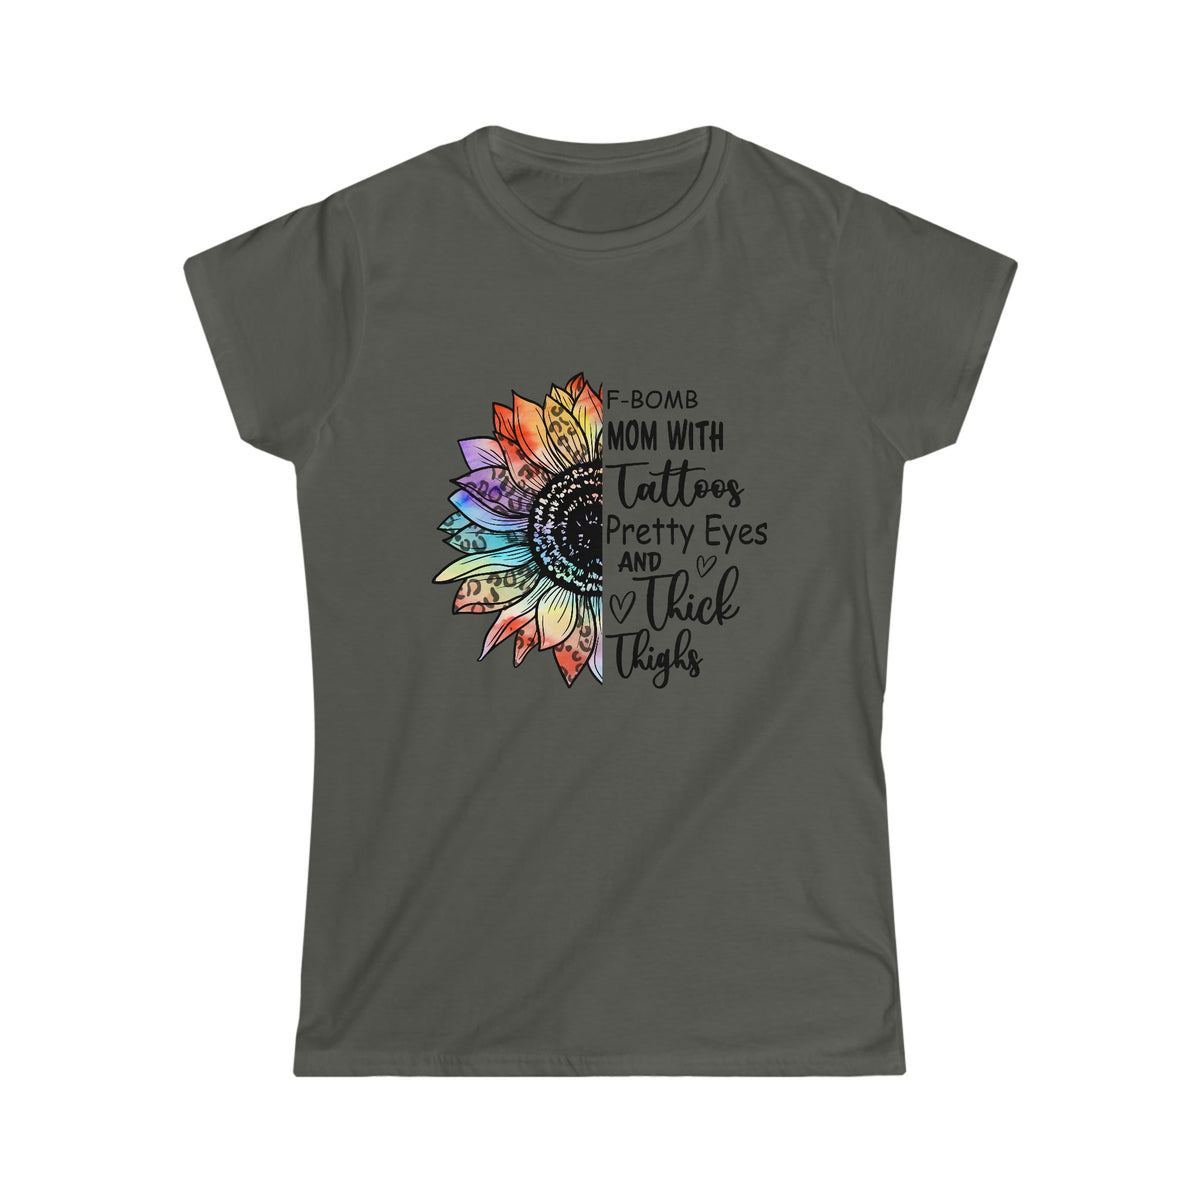 Tattoos and Thick Theighs Women's Softstyle Tee - Salty Medic Clothing Co.